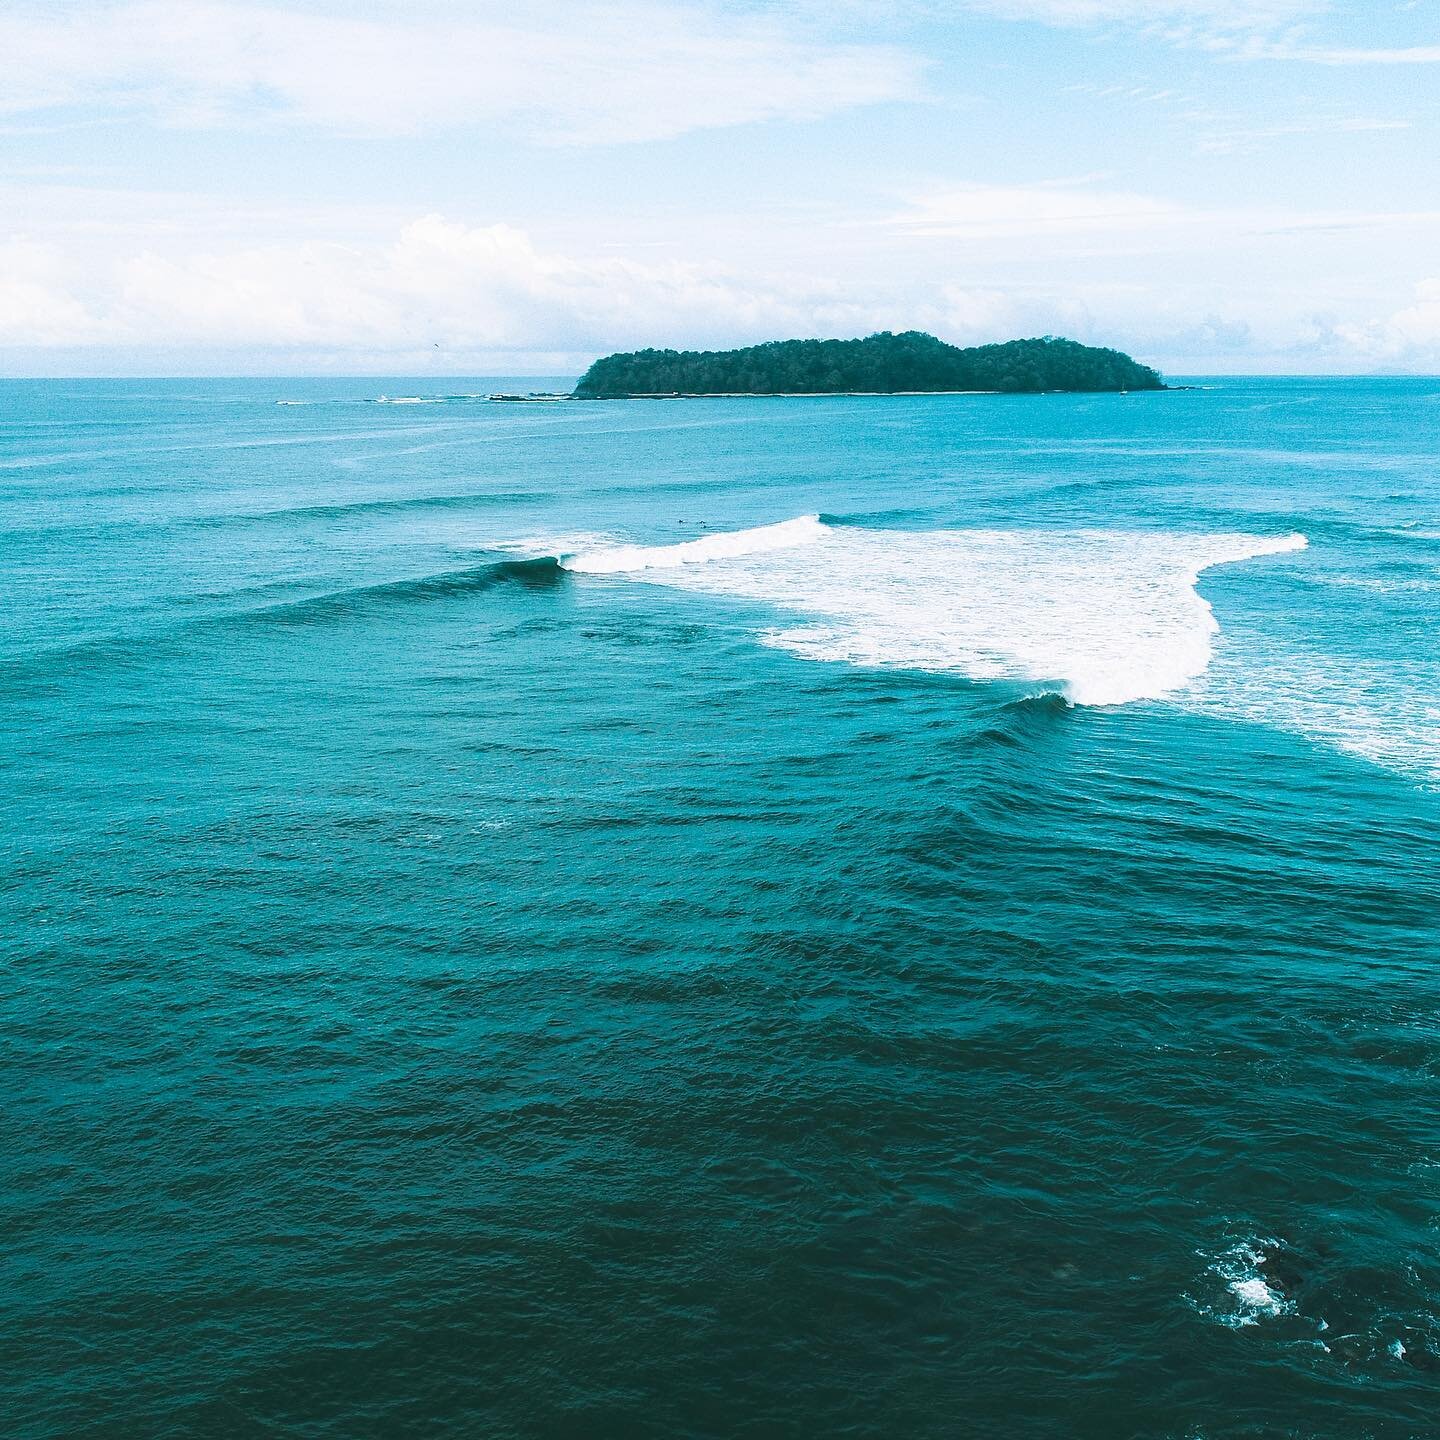 Santa Catalina
- the most famous point break in Panama. 

Did you know there are also other and less intimidating surf spots in Santa Catalina if you are not an advanced surfer (yet)? 😉

Estero beach for example is just around the corner and great i